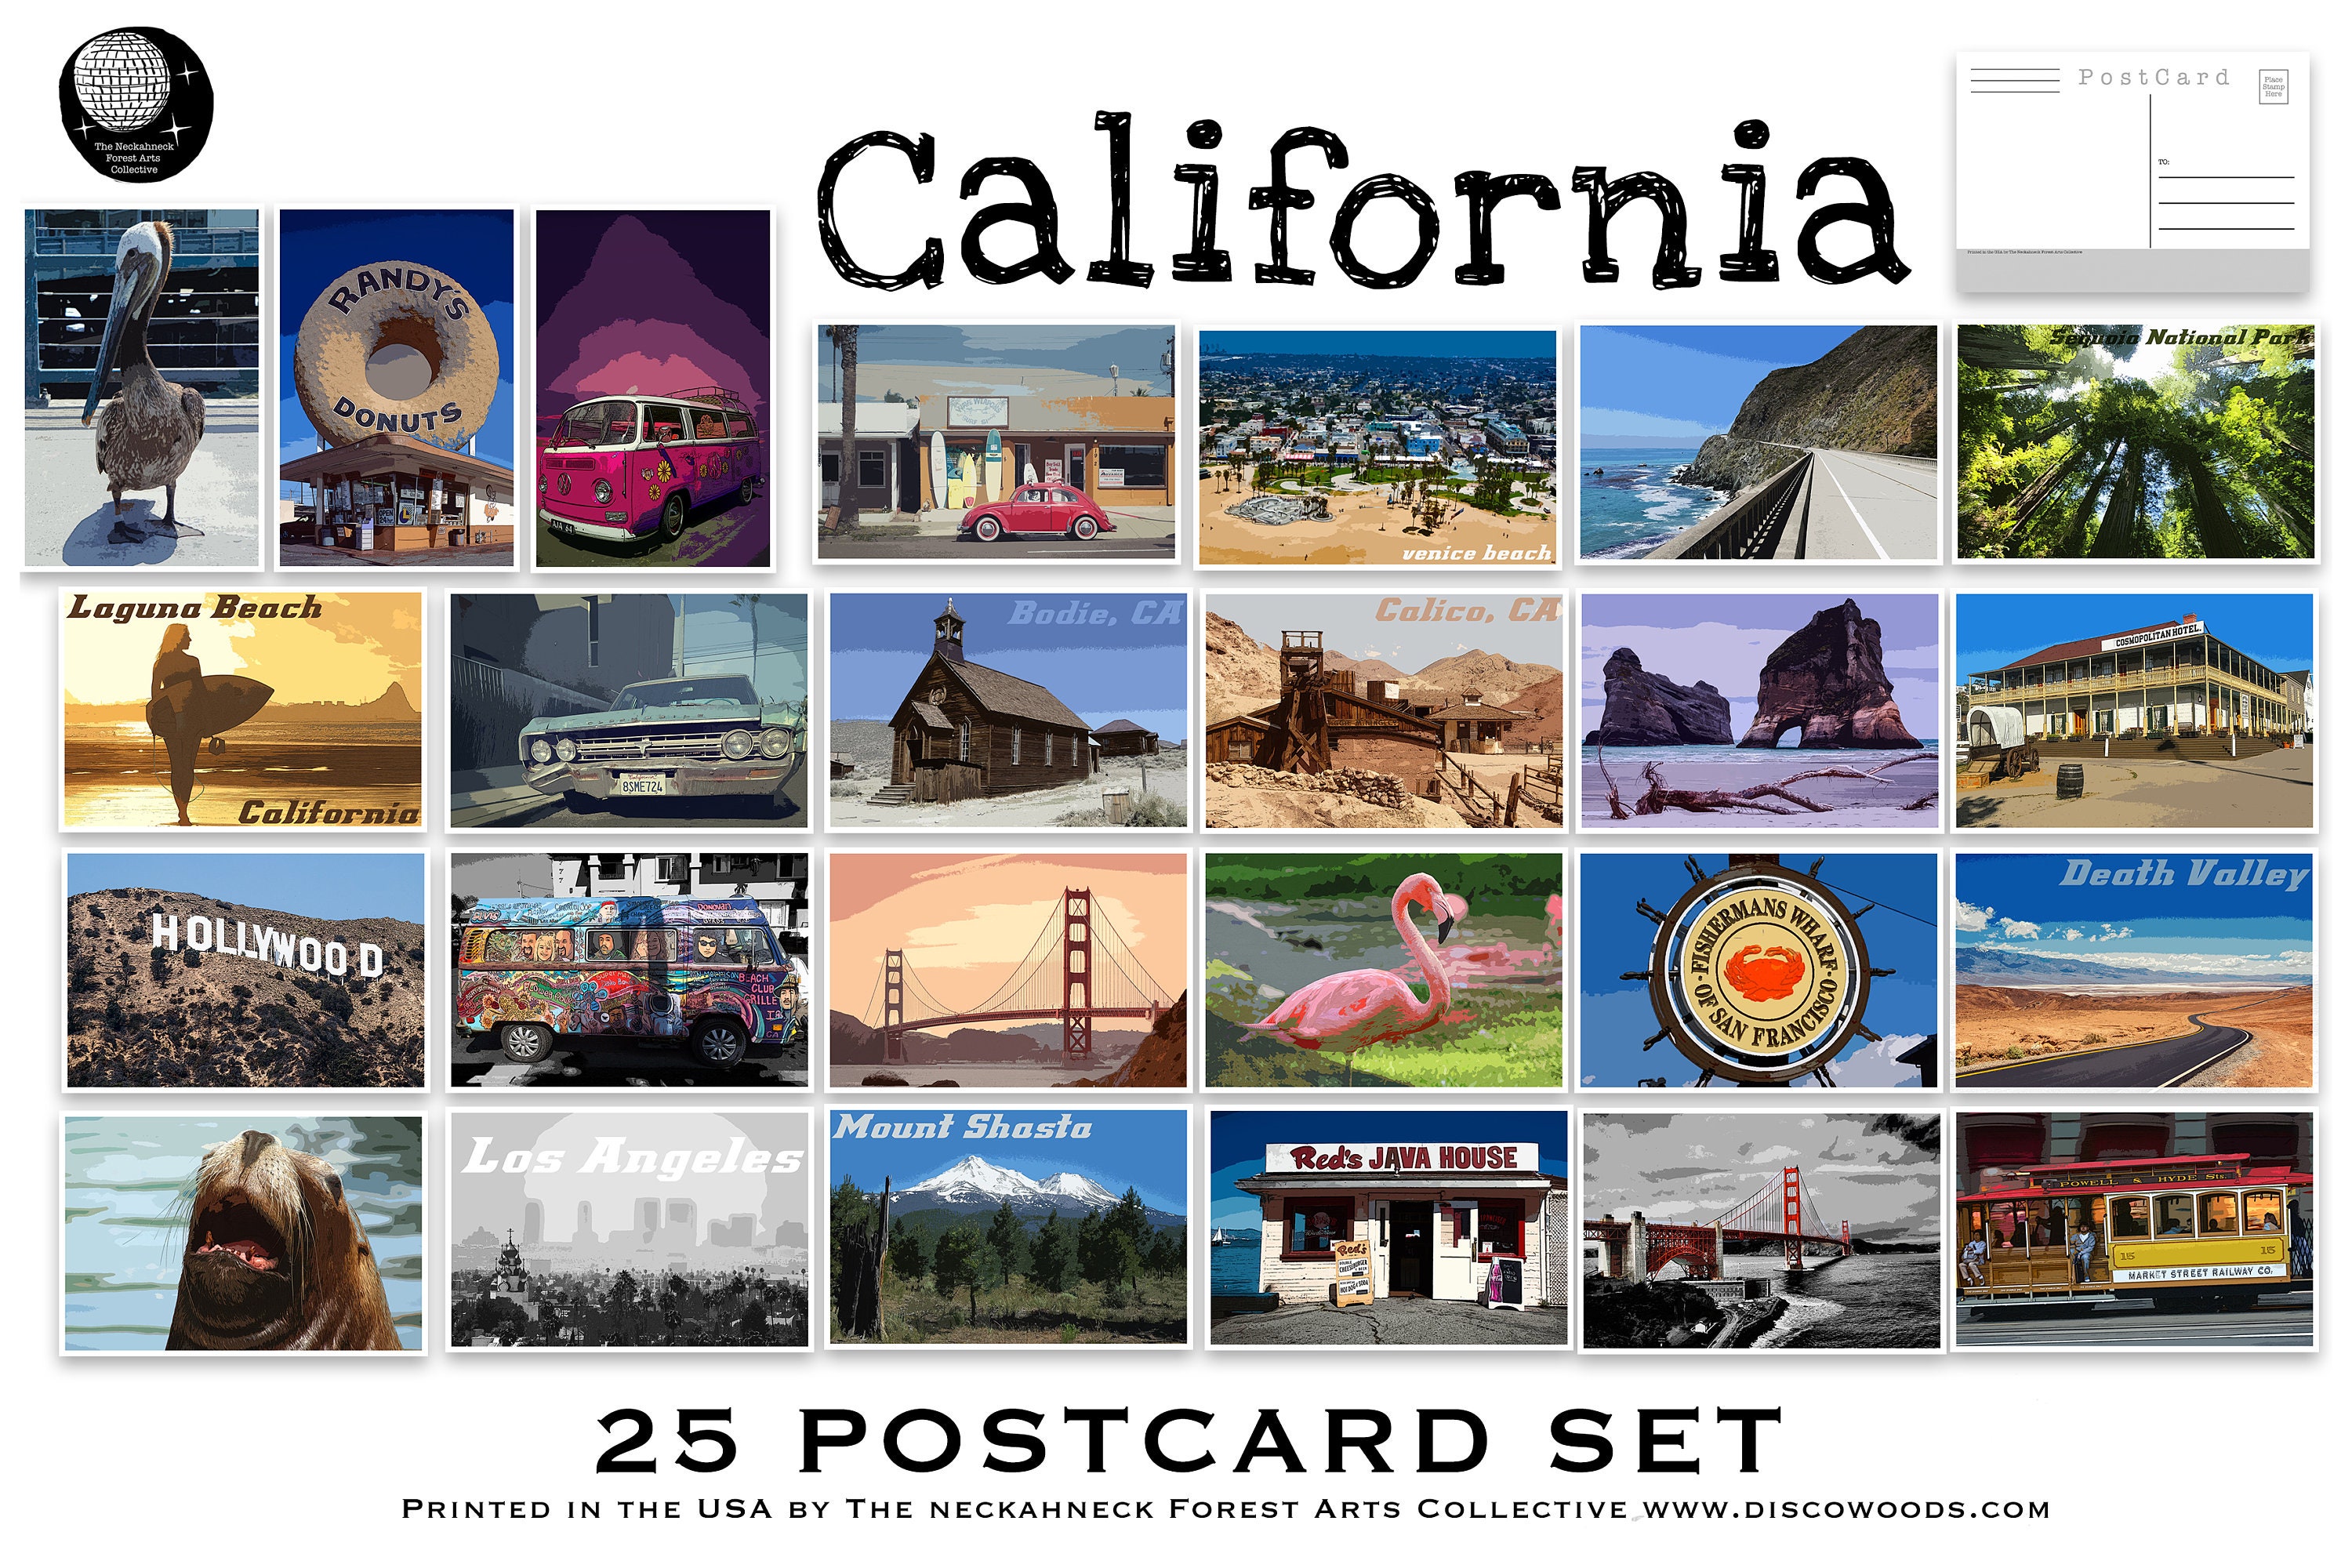 GREETINGS FROM LOS ANGELES, CA vintage reprint postcard set of 20 identical  postcards. Large letter Los Angeles, California city name post card pack